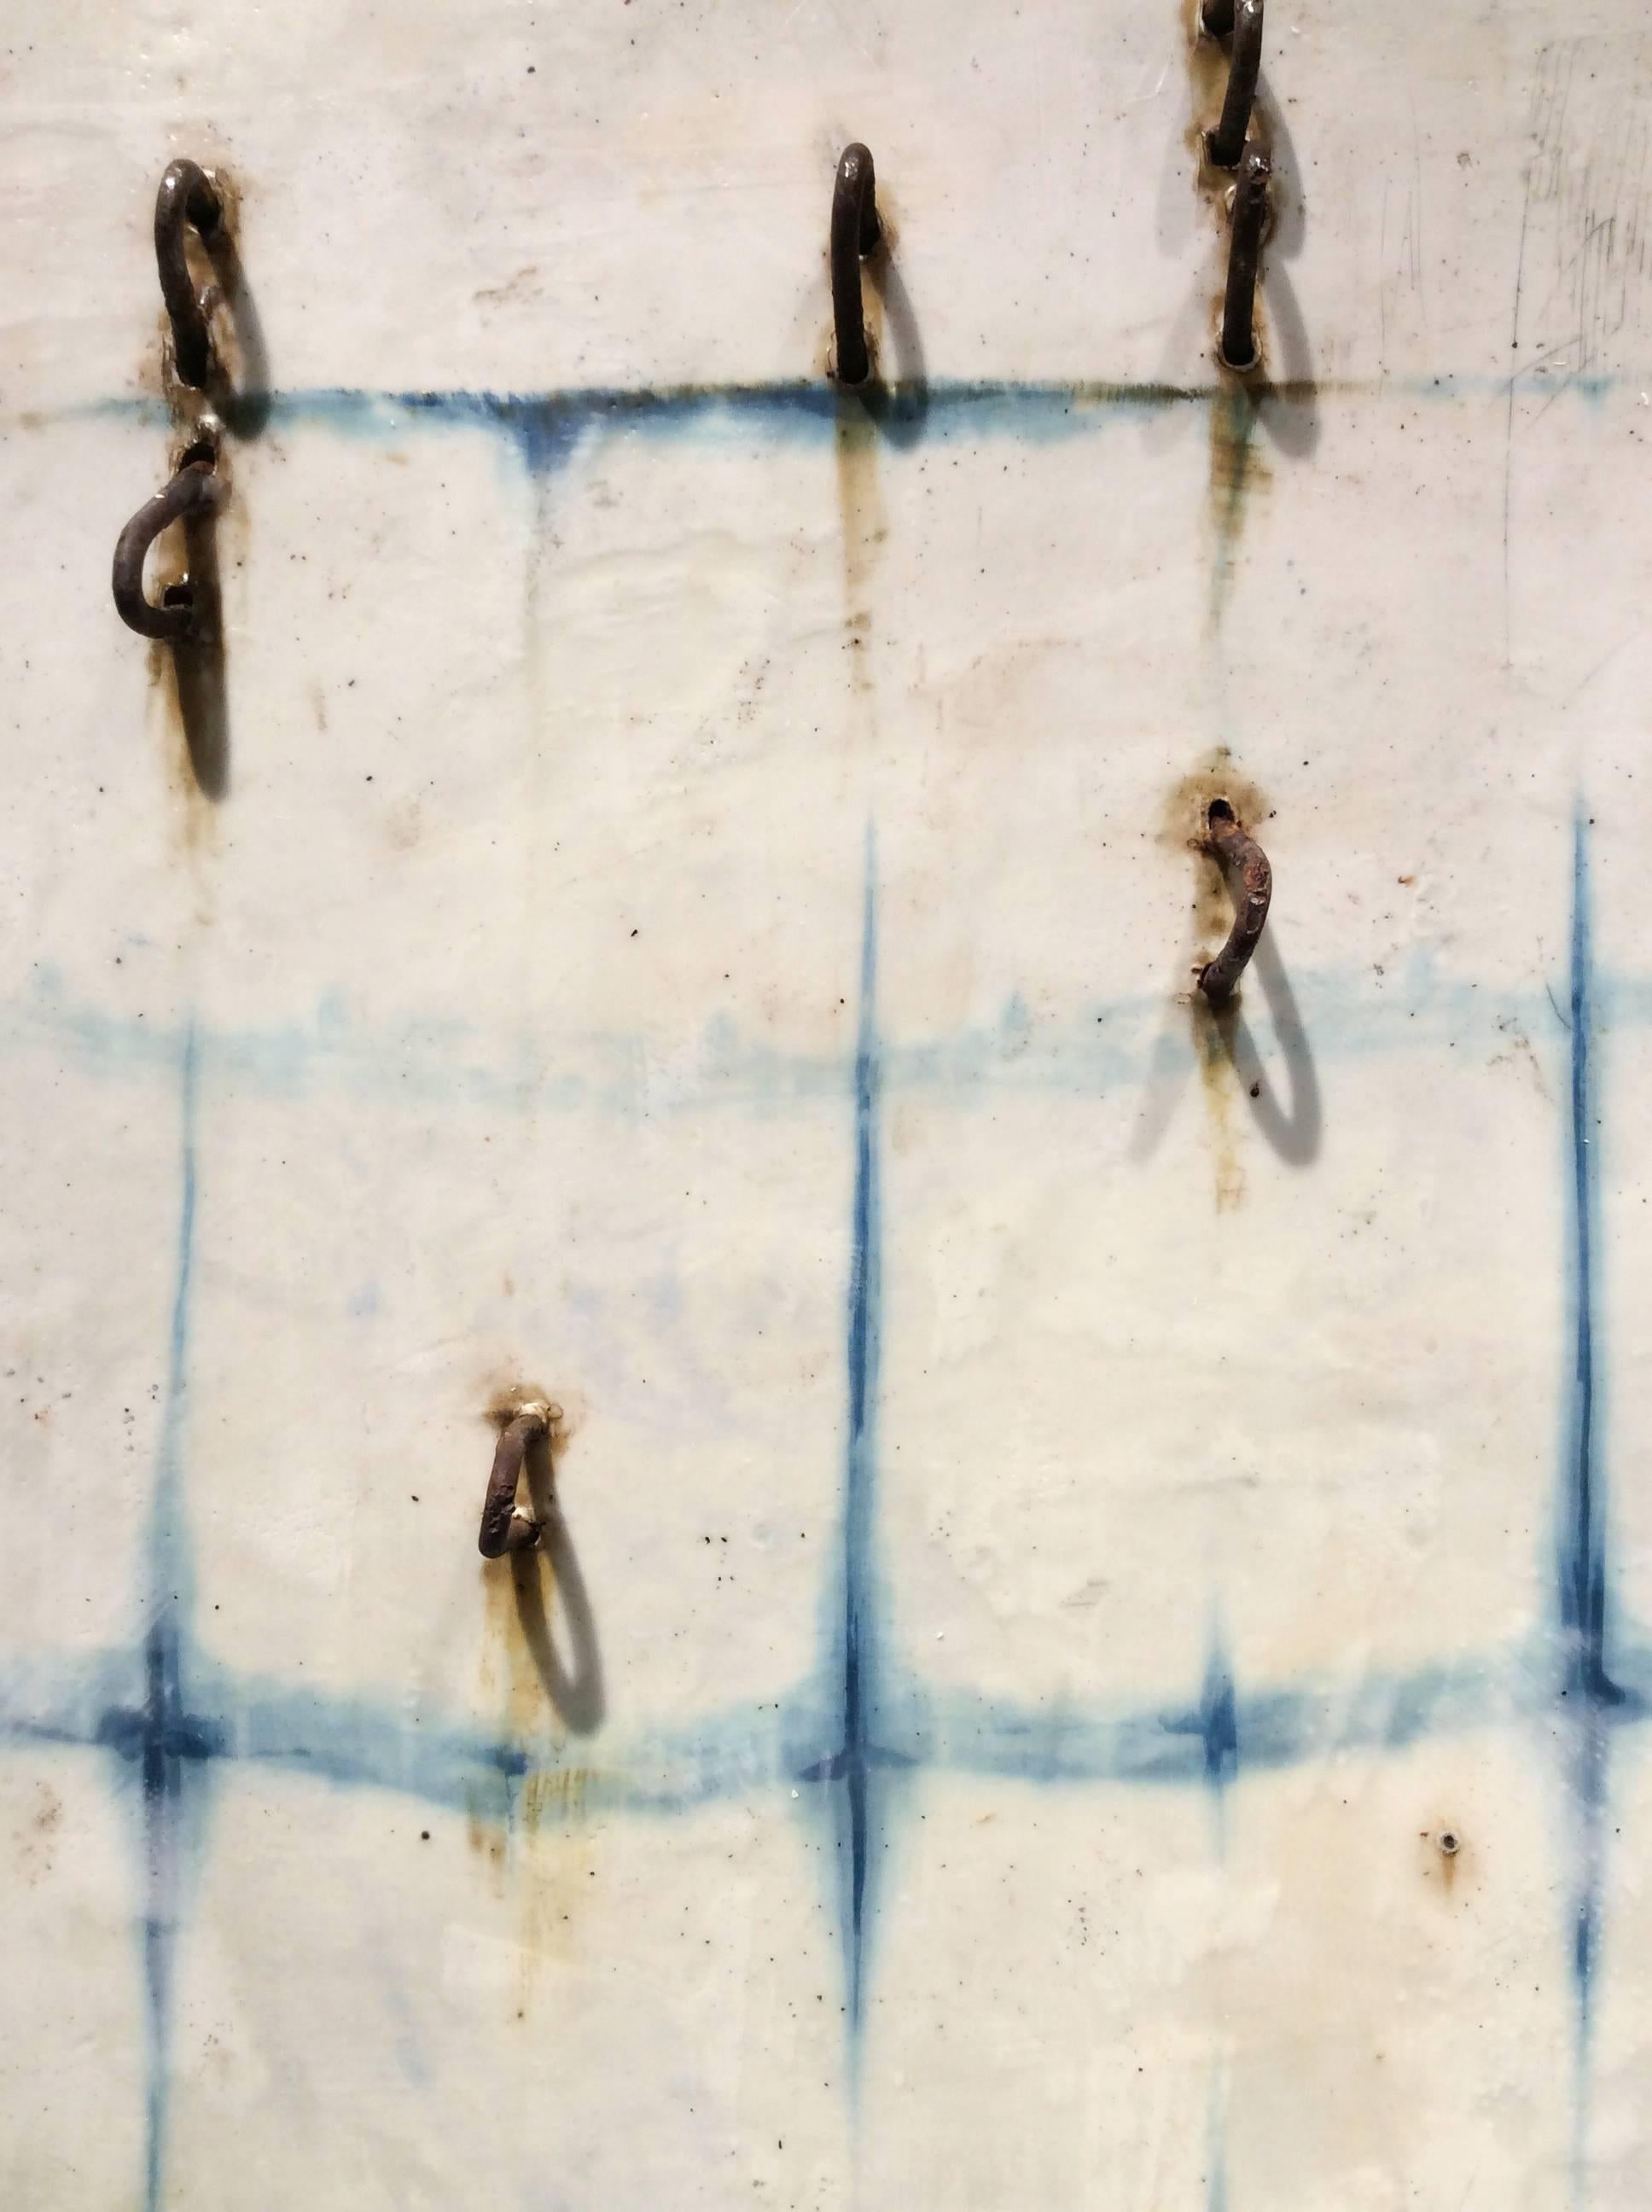 Hand dyed indigo fabric, wax, metal, and thread on panel
33.5 x 35 x 3 inches

This contemporary pattern-based abstract silk and encaustic work on panel was created by San Francisco-based artist Susan Stover as part of her Indigo series, so-named